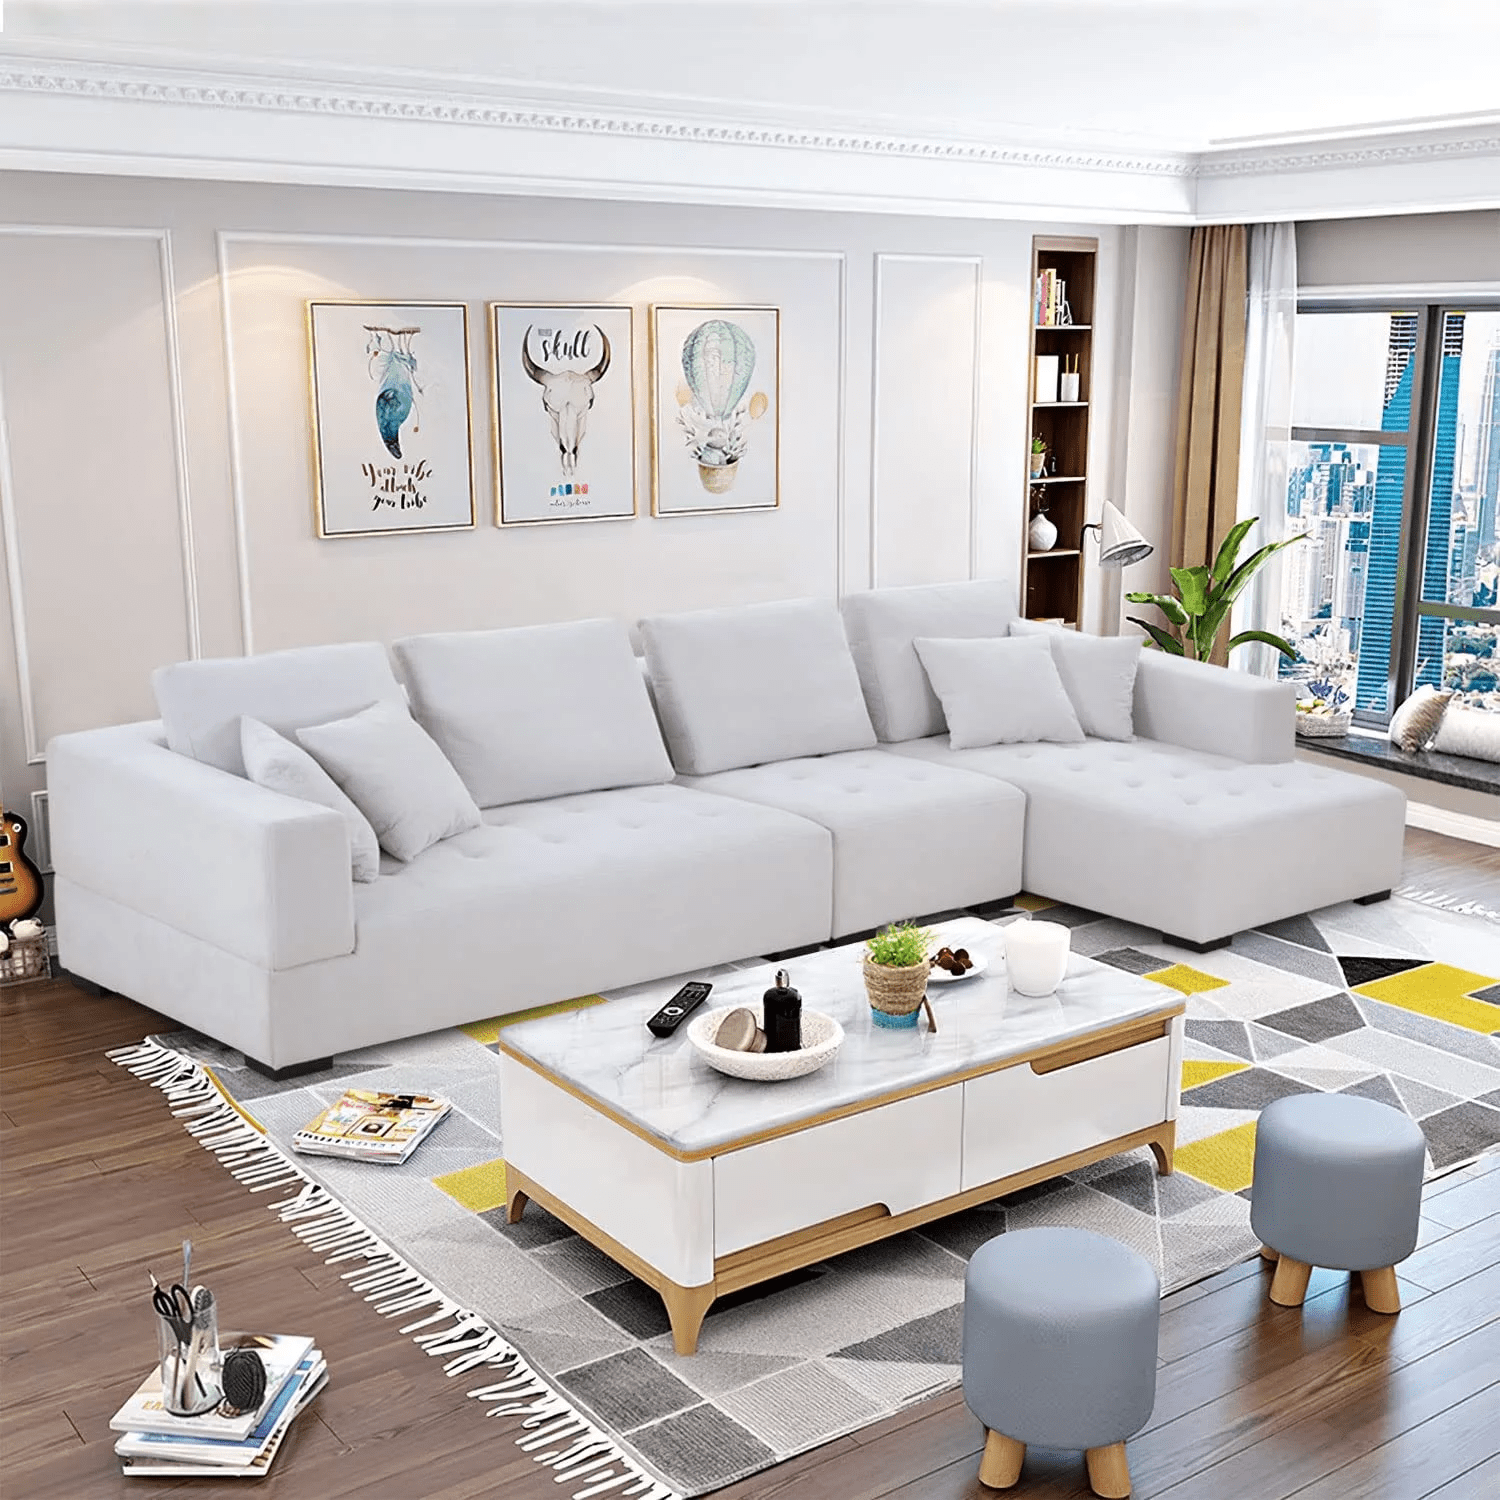 Kevinplus 134.6'' Large Sectional Sofa Couch L-Shape with Chaise Lounge ...